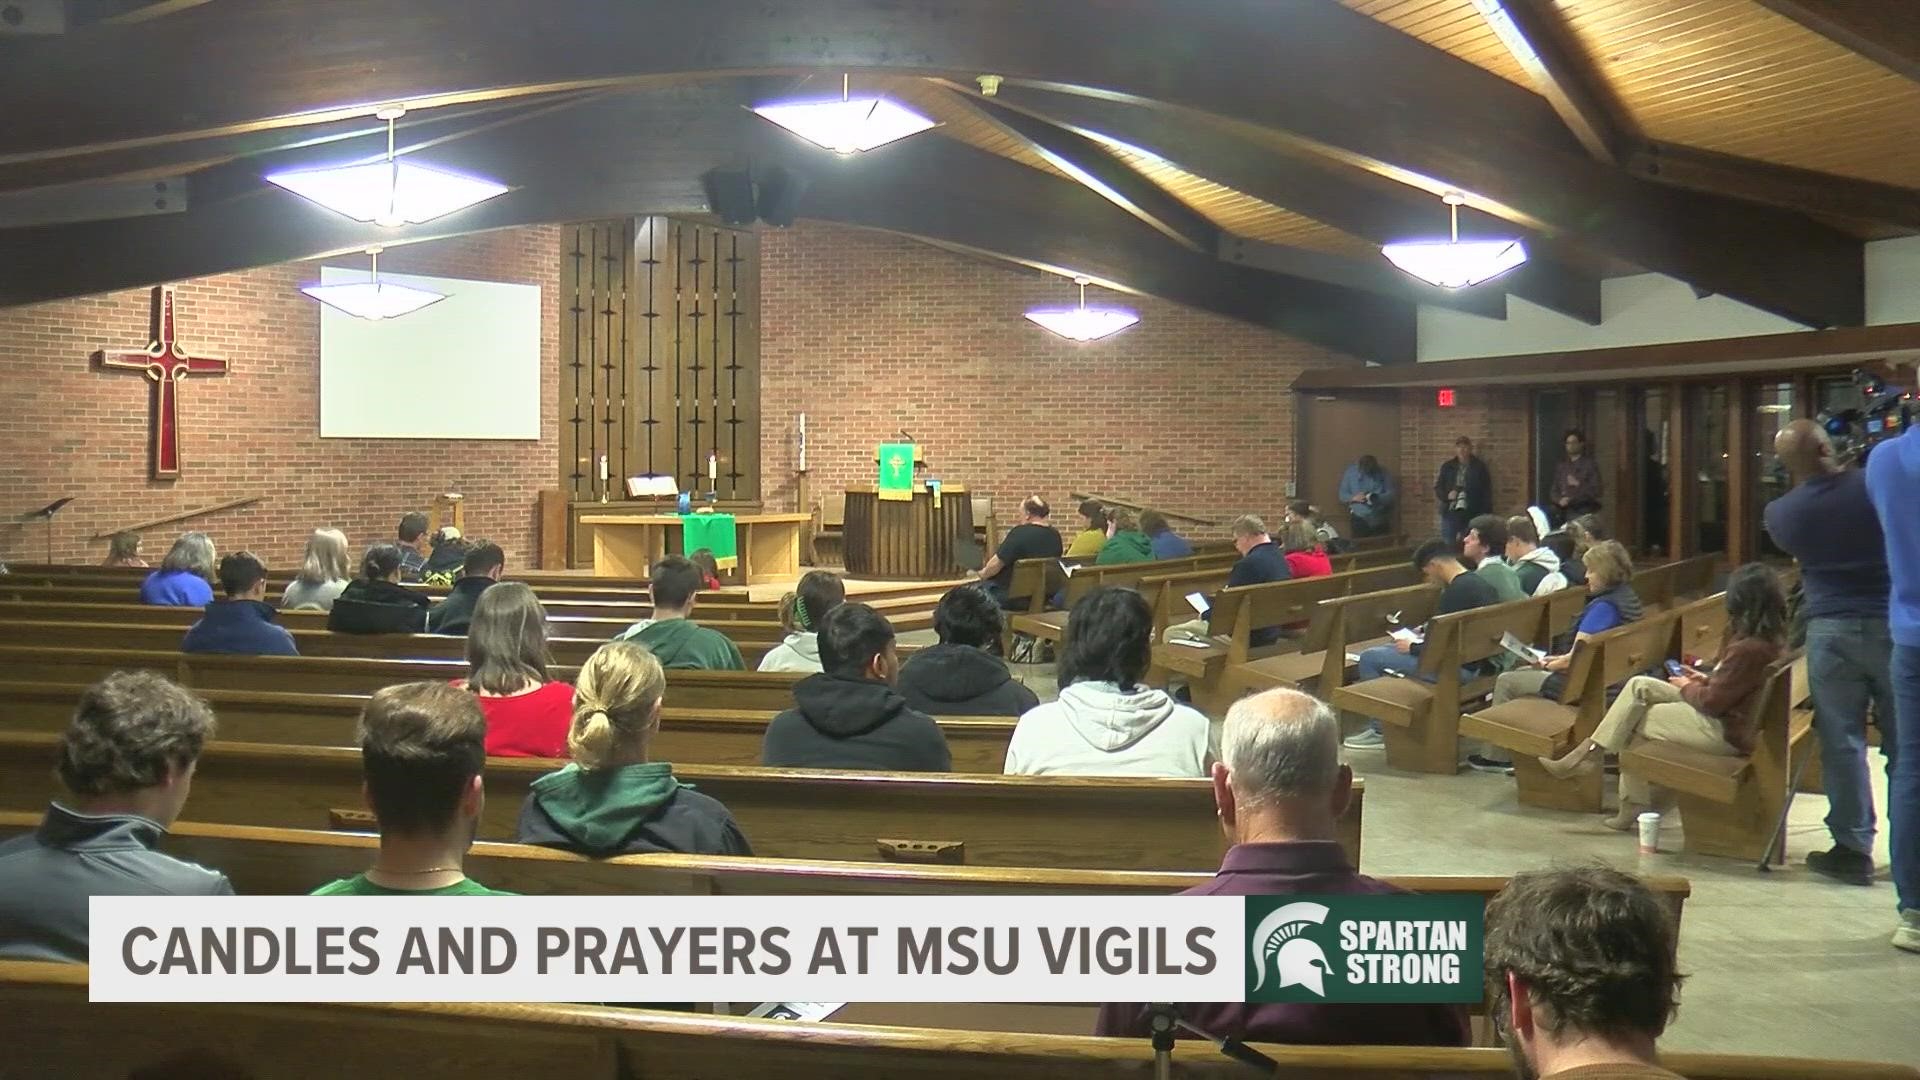 Services at several area churches offer support for members of the Michigan State community following shooting that left 3 dead, and 5 others injured.